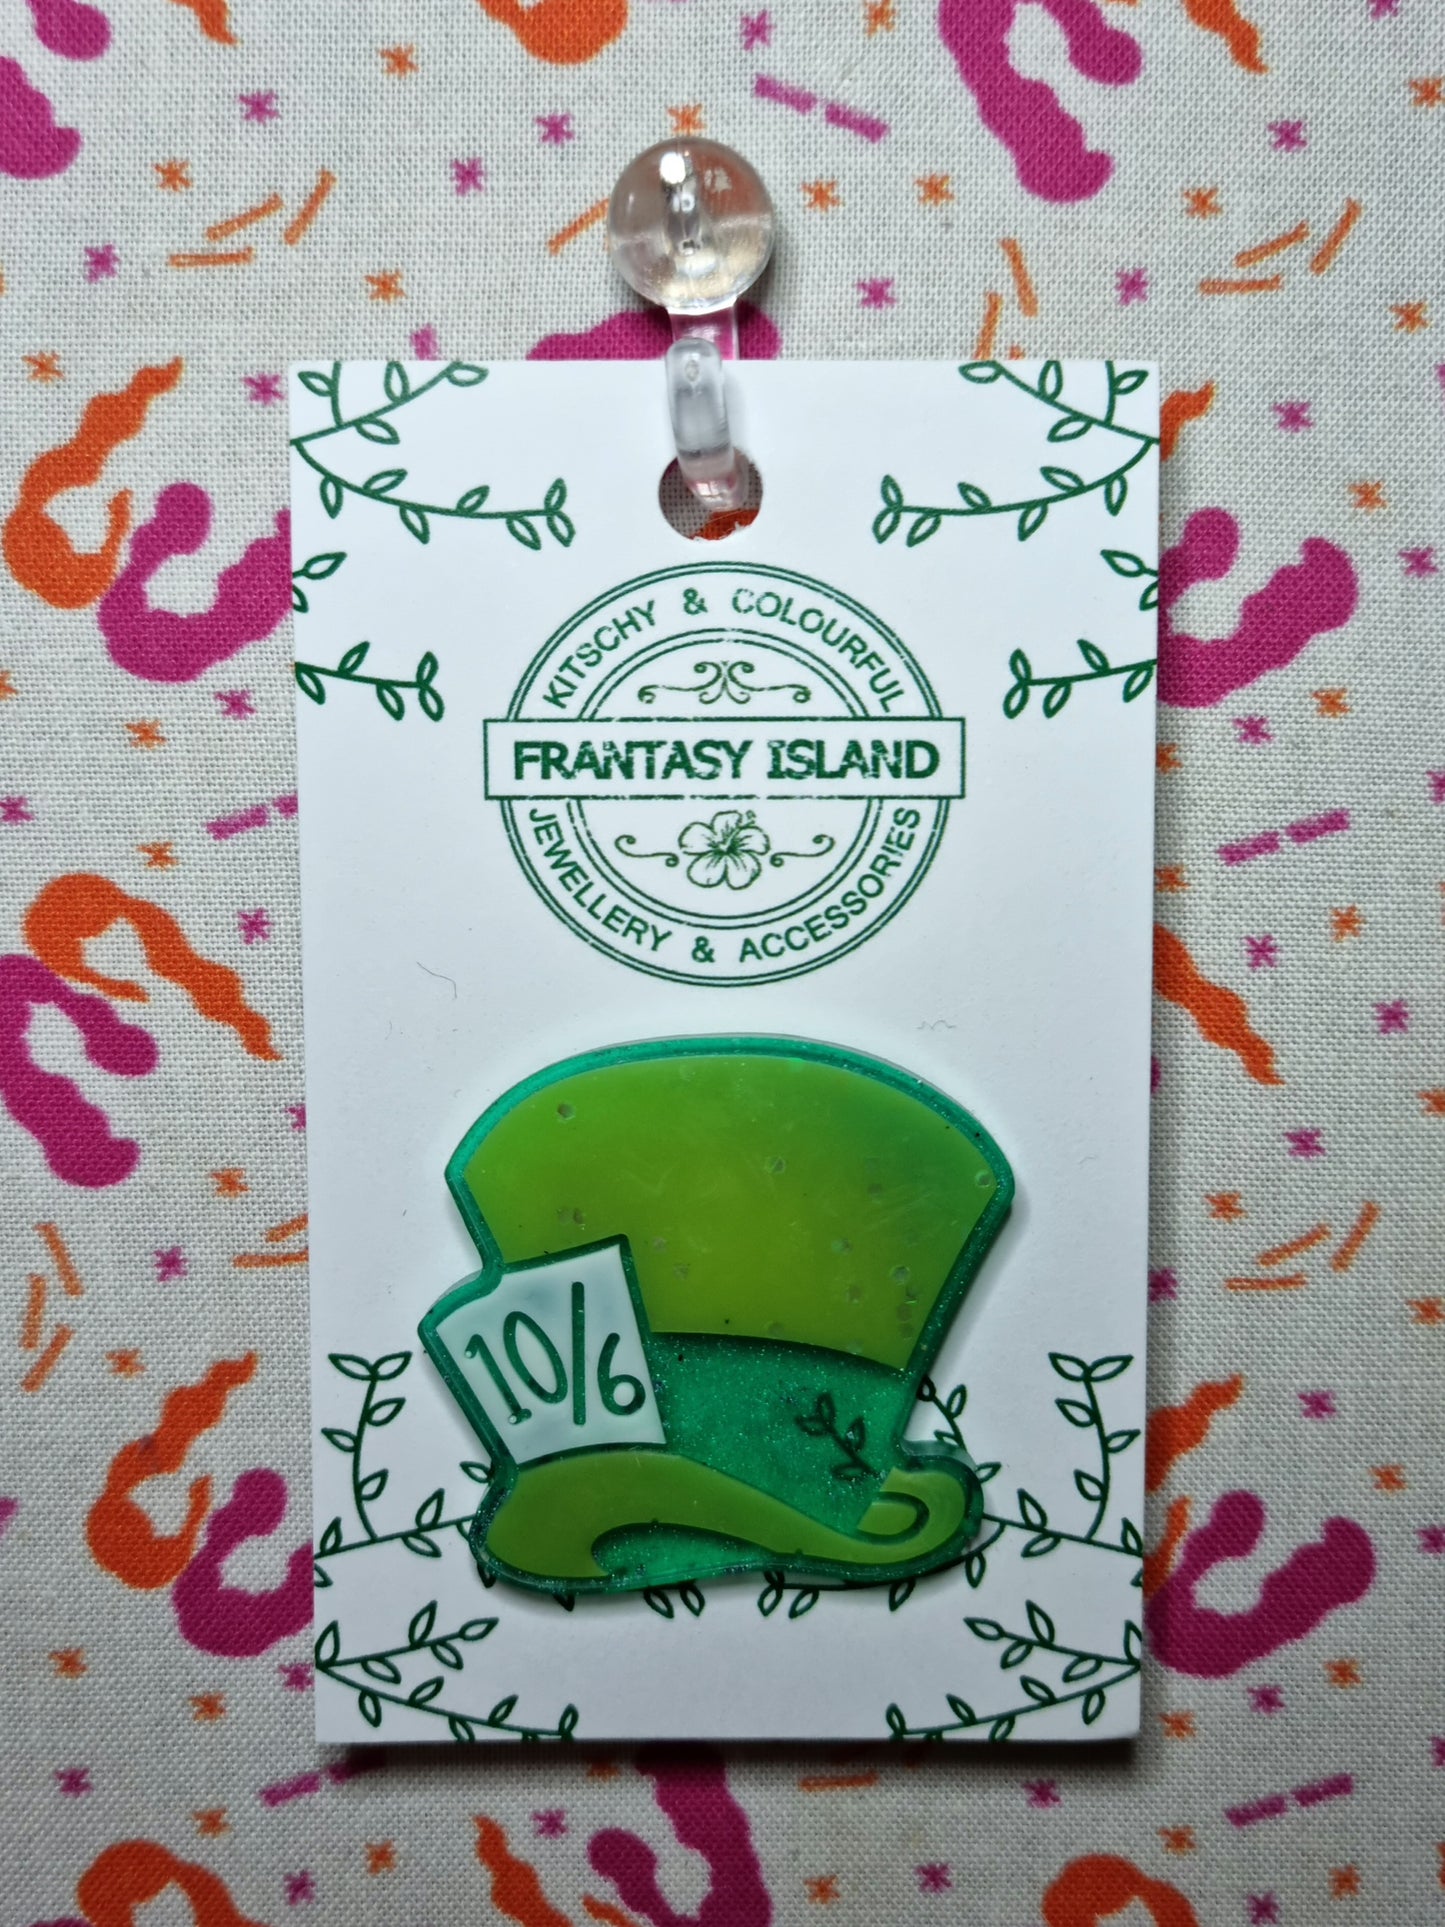 Mad Hatter Pin